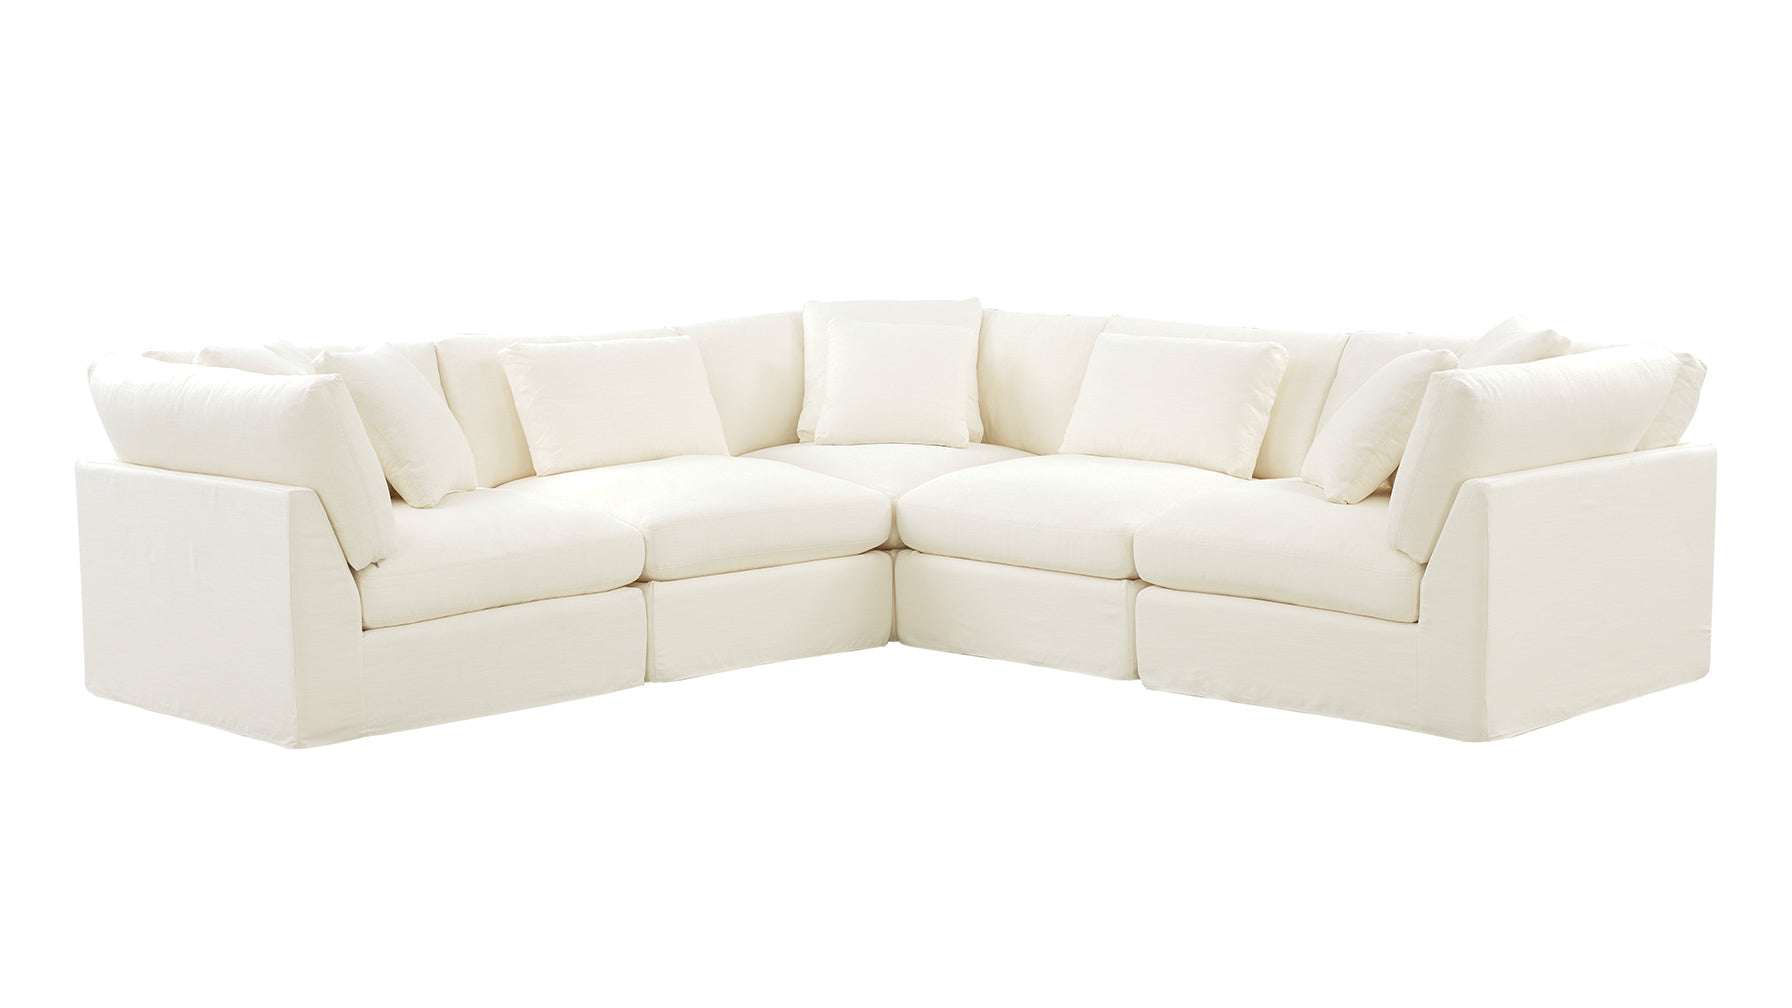 Get Together™ 5-Piece Modular Sectional Closed, Large, Cream Linen - Image 6